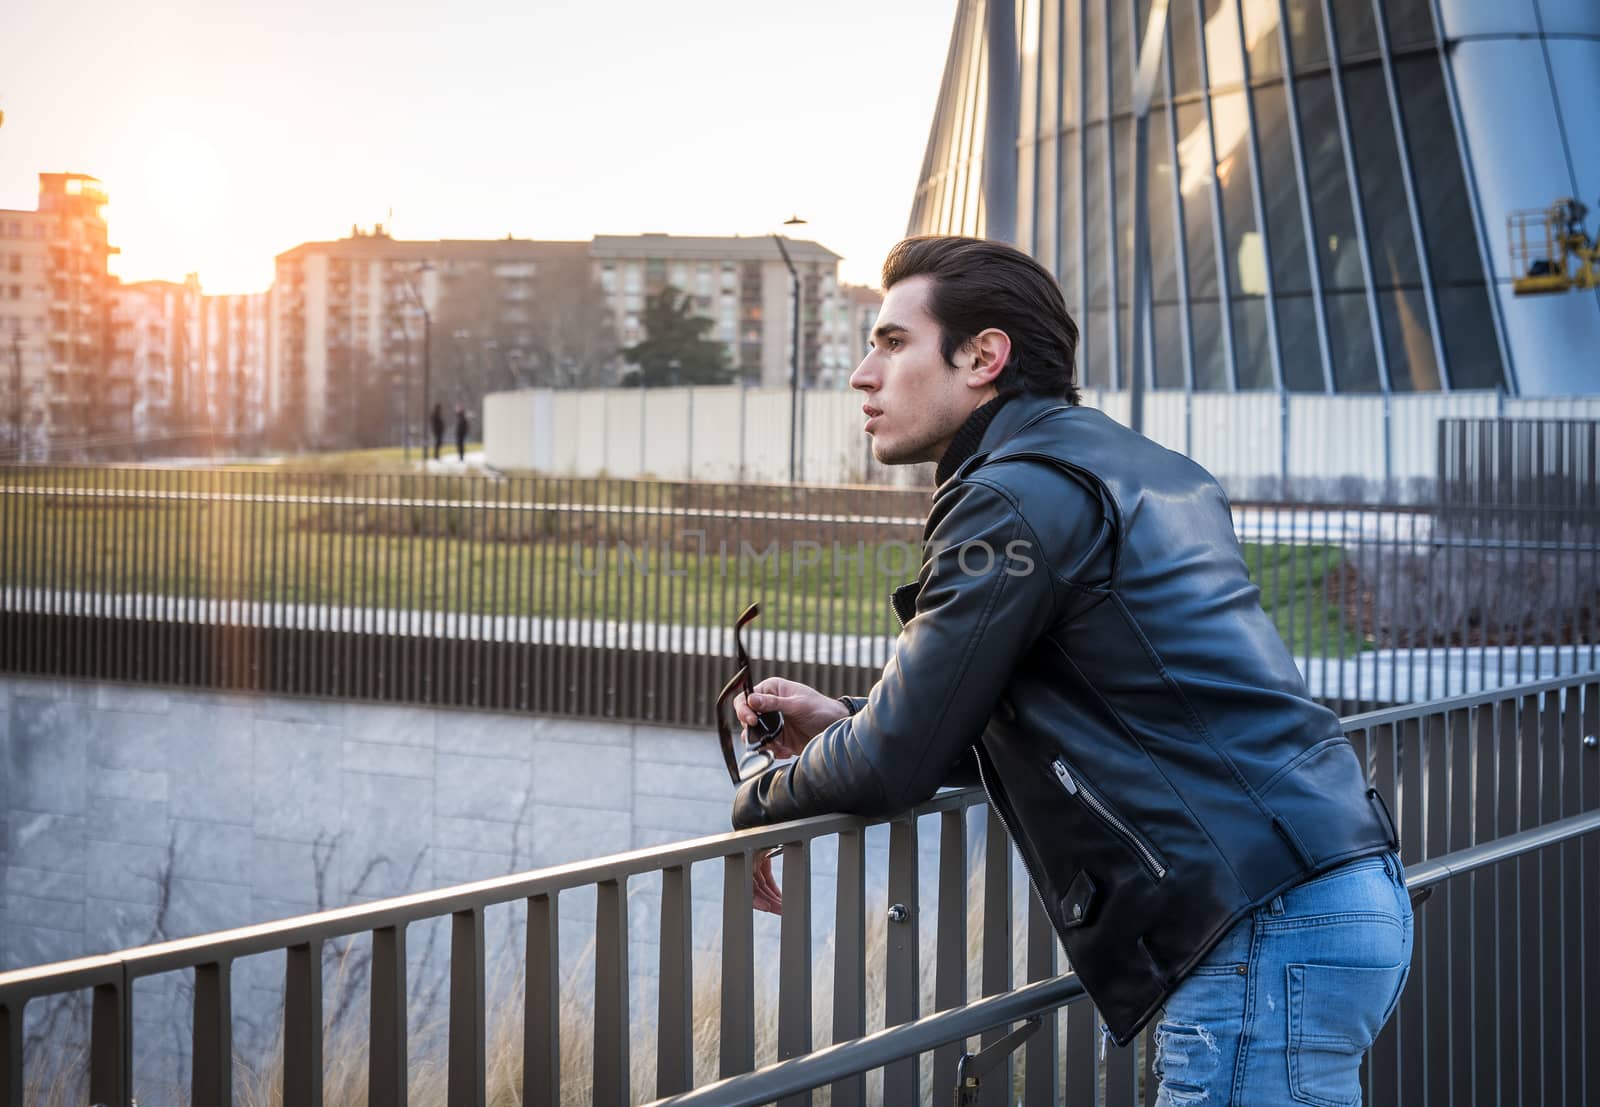 One handsome young man in urban setting in modern city, standing, wearing black leather jacket and jeans